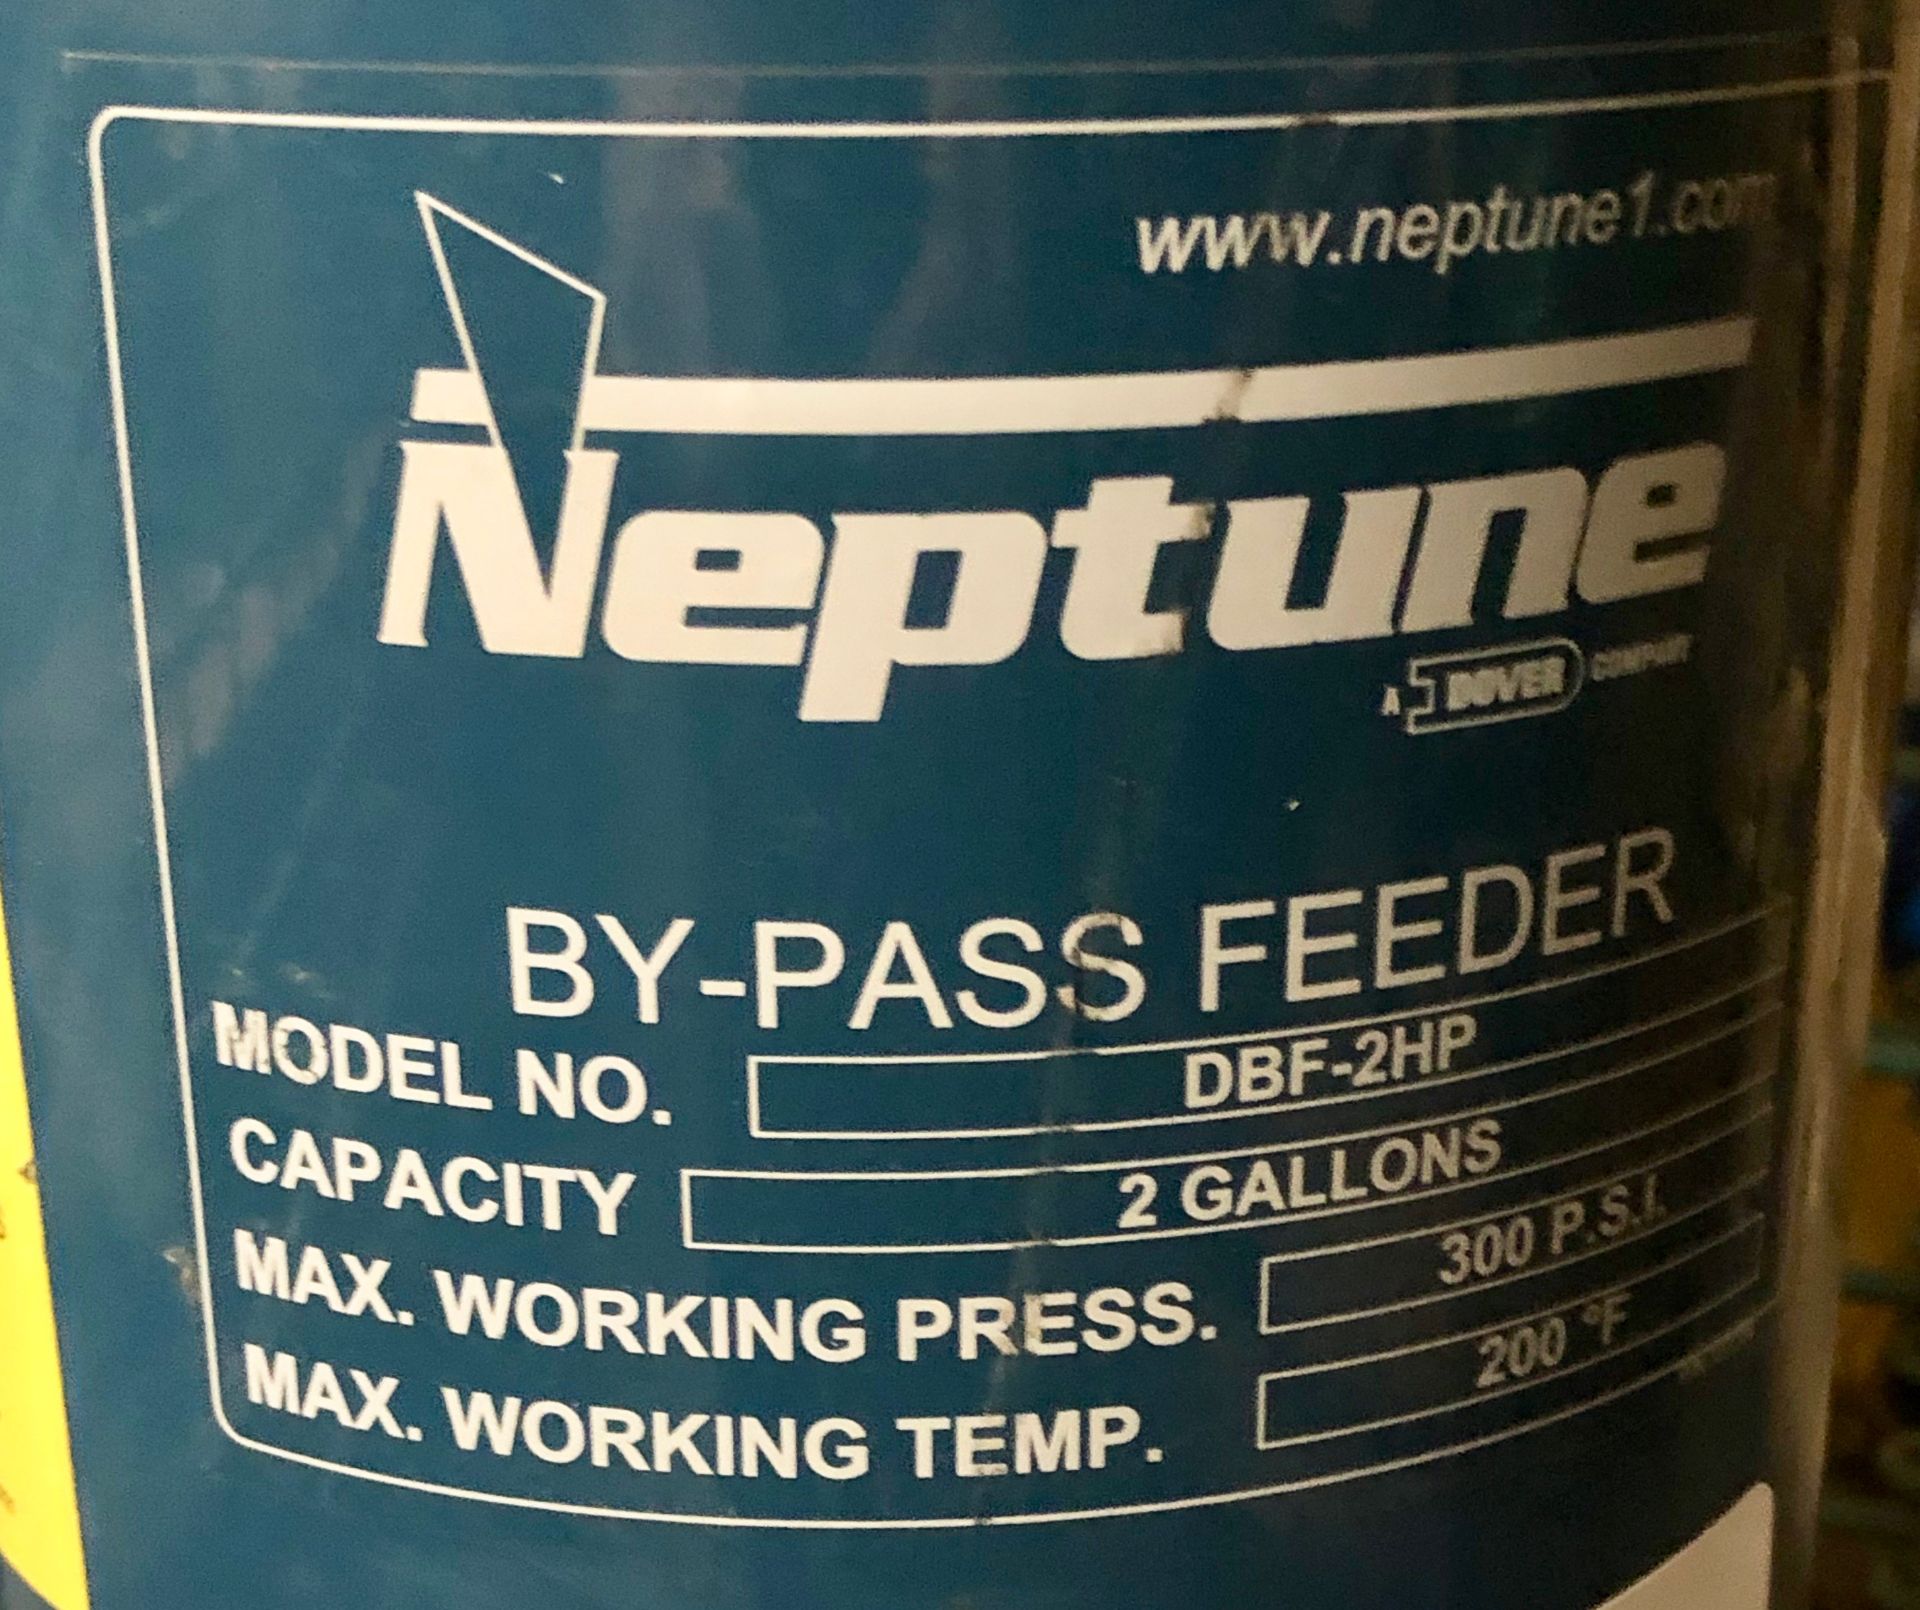 Neptune By-Pass Feeder Model DBF-2HP 2 Gallon Capacity 300 PSI Max working pressure 200 F Max - Image 2 of 2